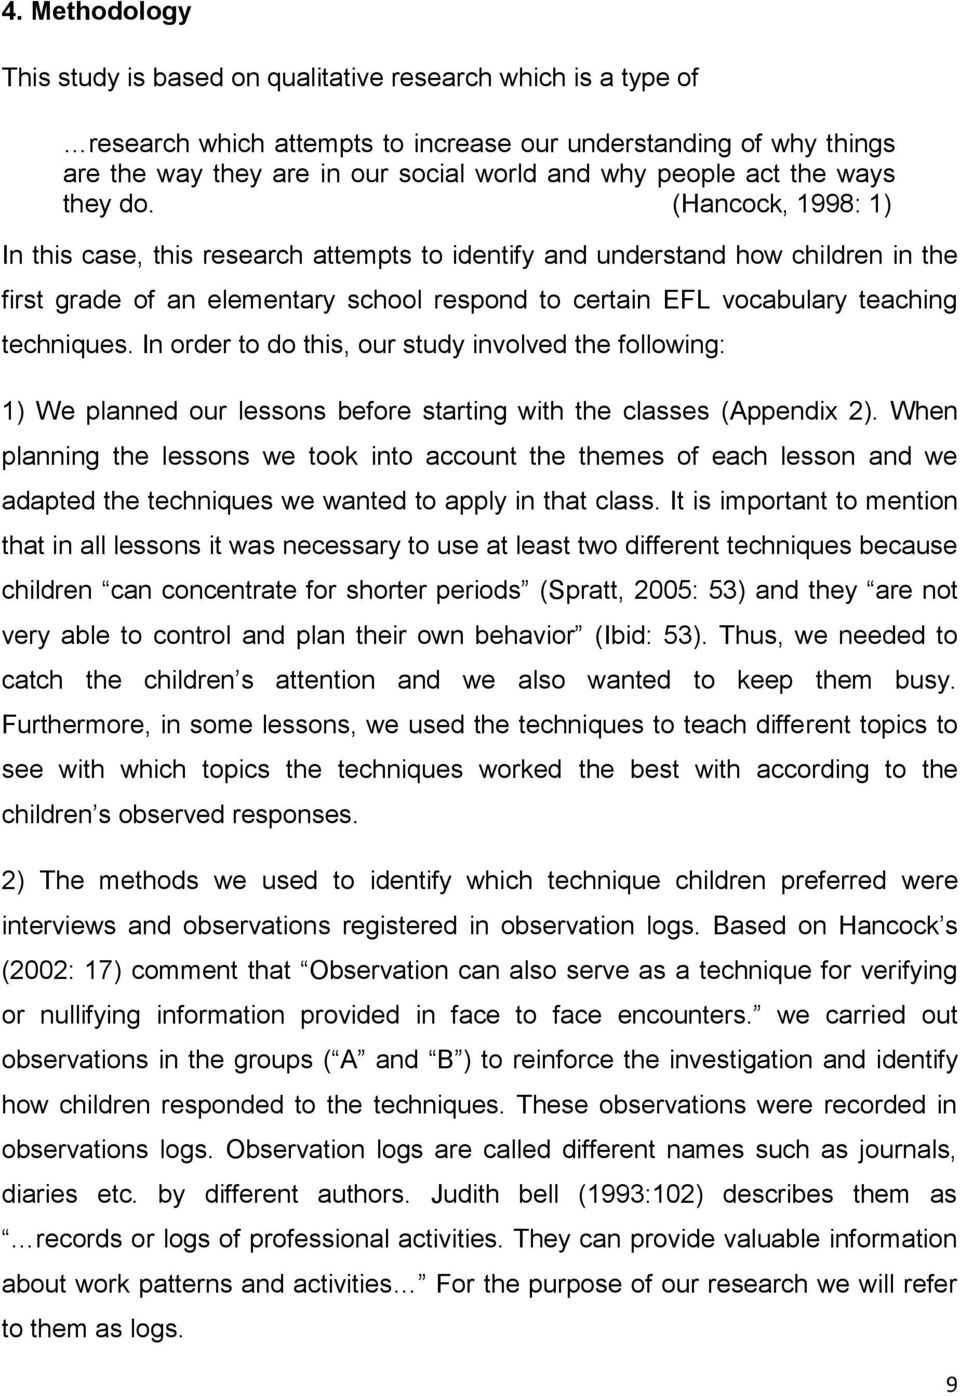 (Hancock, 1998: 1) In this case, this research attempts to identify and understand how children in the first grade of an elementary school respond to certain EFL vocabulary teaching techniques.